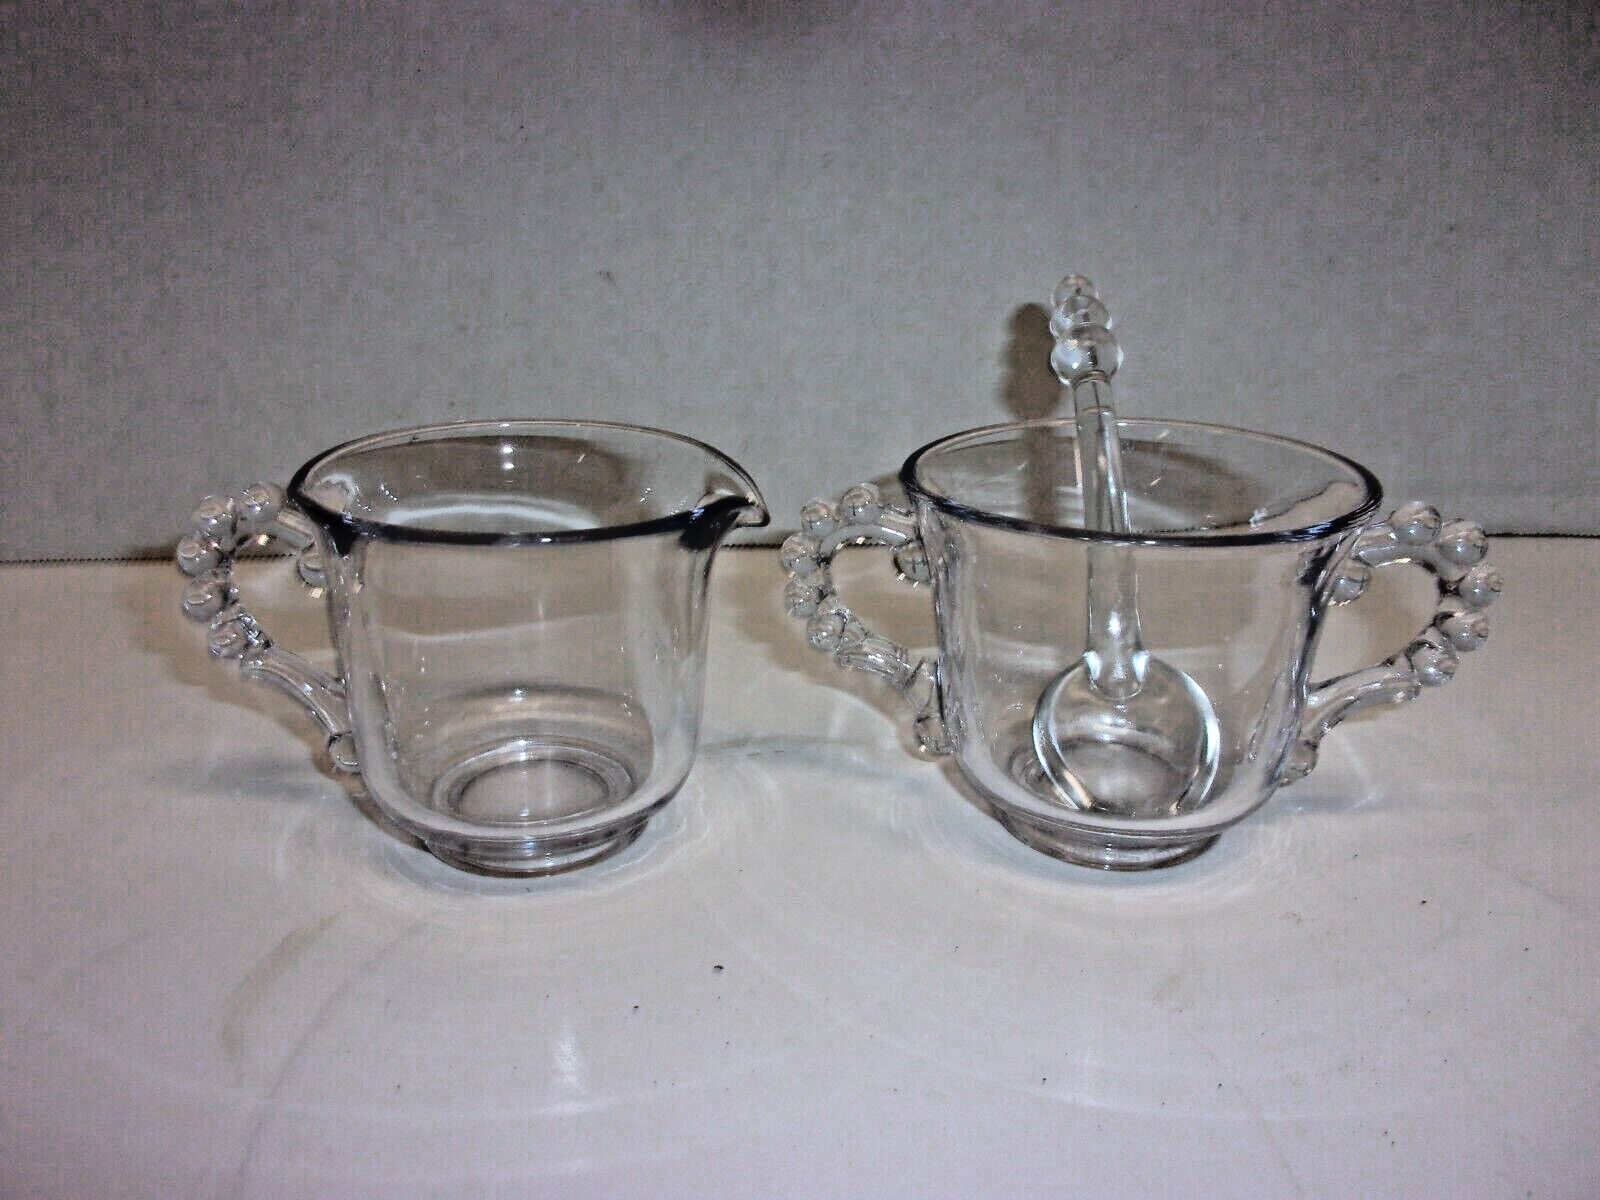 Vintage Candlewick Imperial Glass Cream And Sugar Bowl With Spoon.